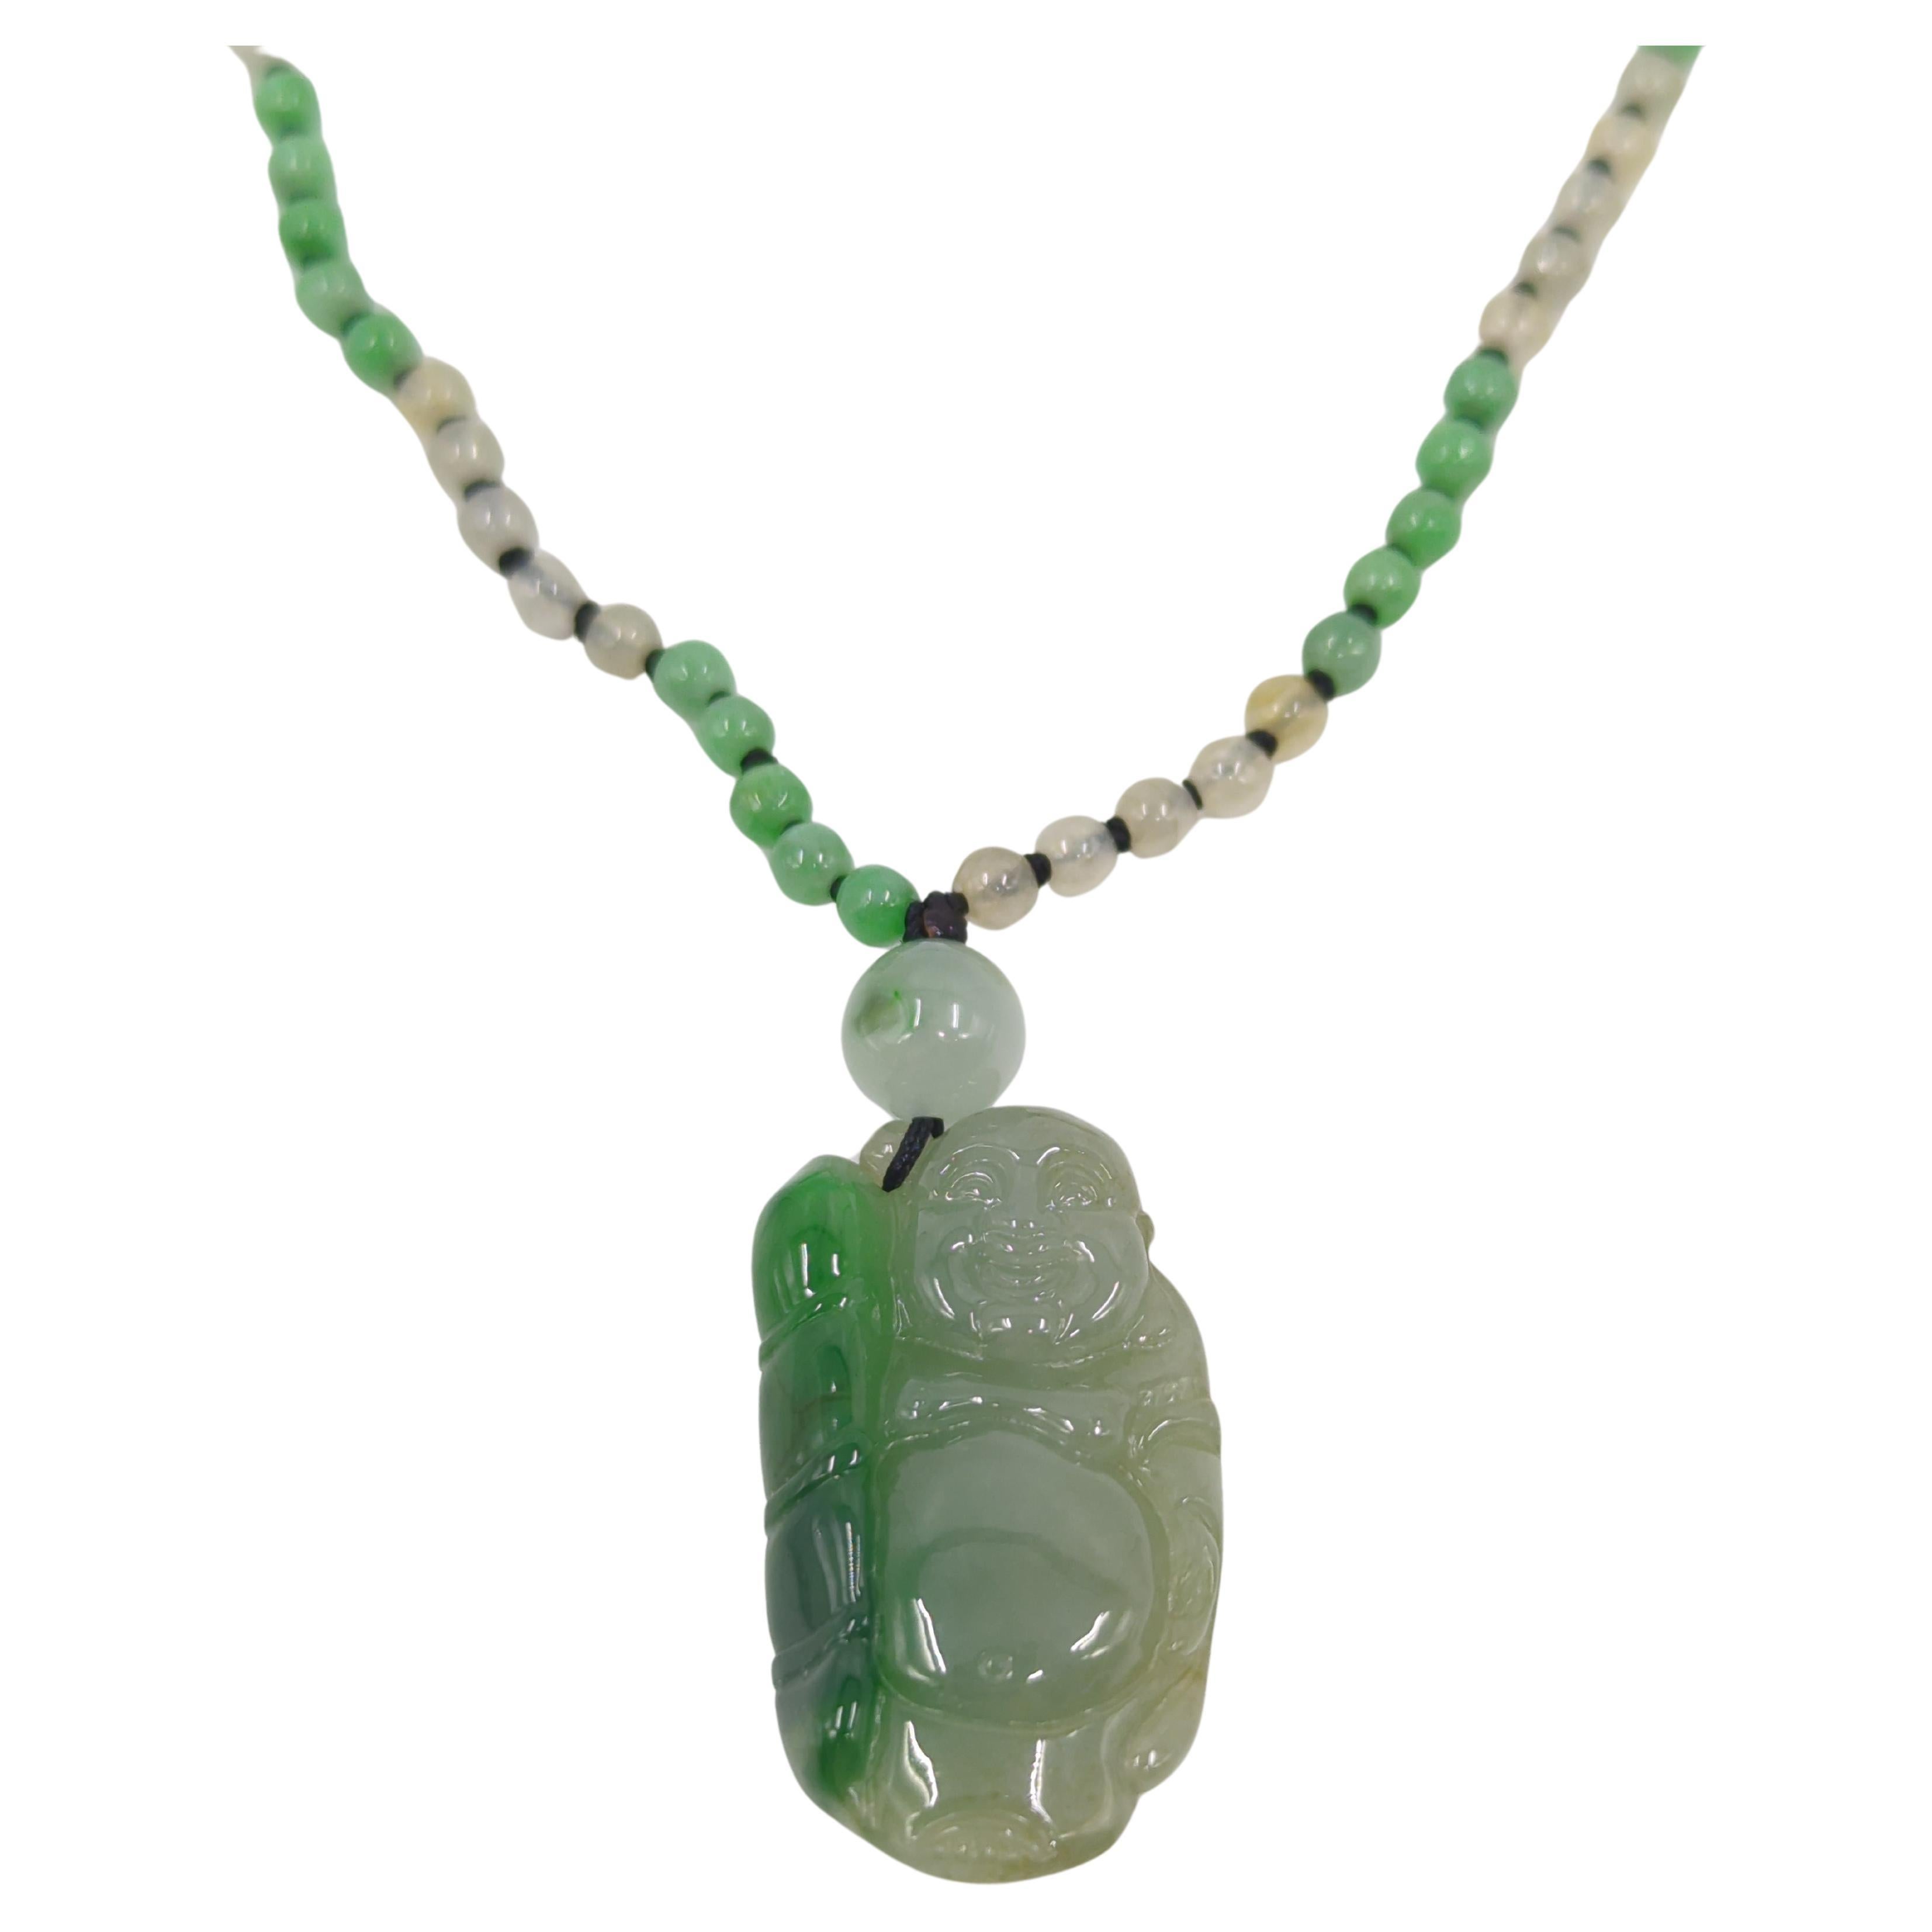 A fine Chinese laughing Buddha pendant in moss green and light celadon jadeite, on a matching light mint green and icy jadeite beaded necklace 21